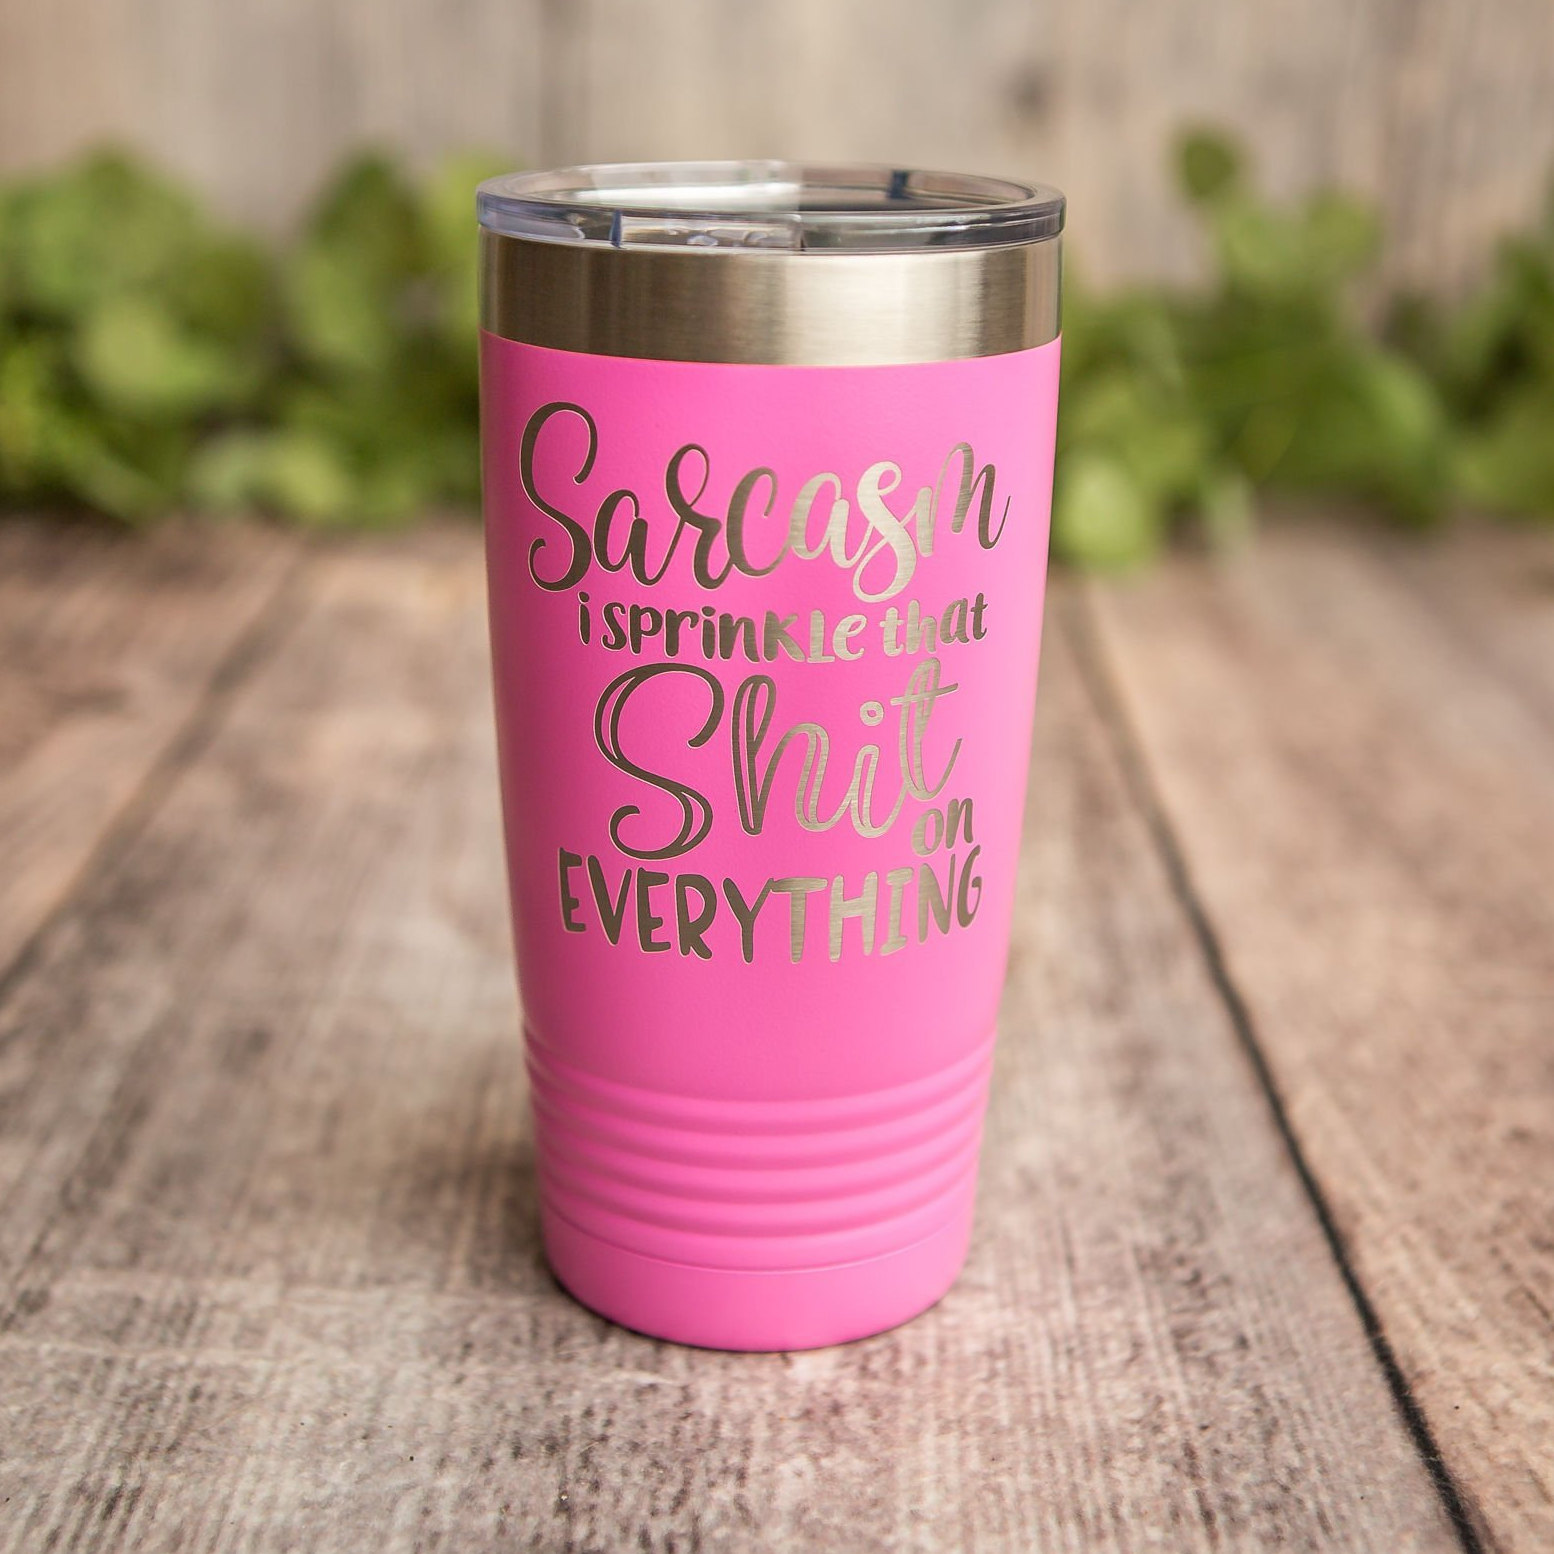 https://3cetching.com/wp-content/uploads/2020/09/sarcasm-i-sprinkle-that-shit-on-everything-mature-engraved-tumbler-funny-travel-mug-explicit-gift-cup-5f5fa2d4.jpg